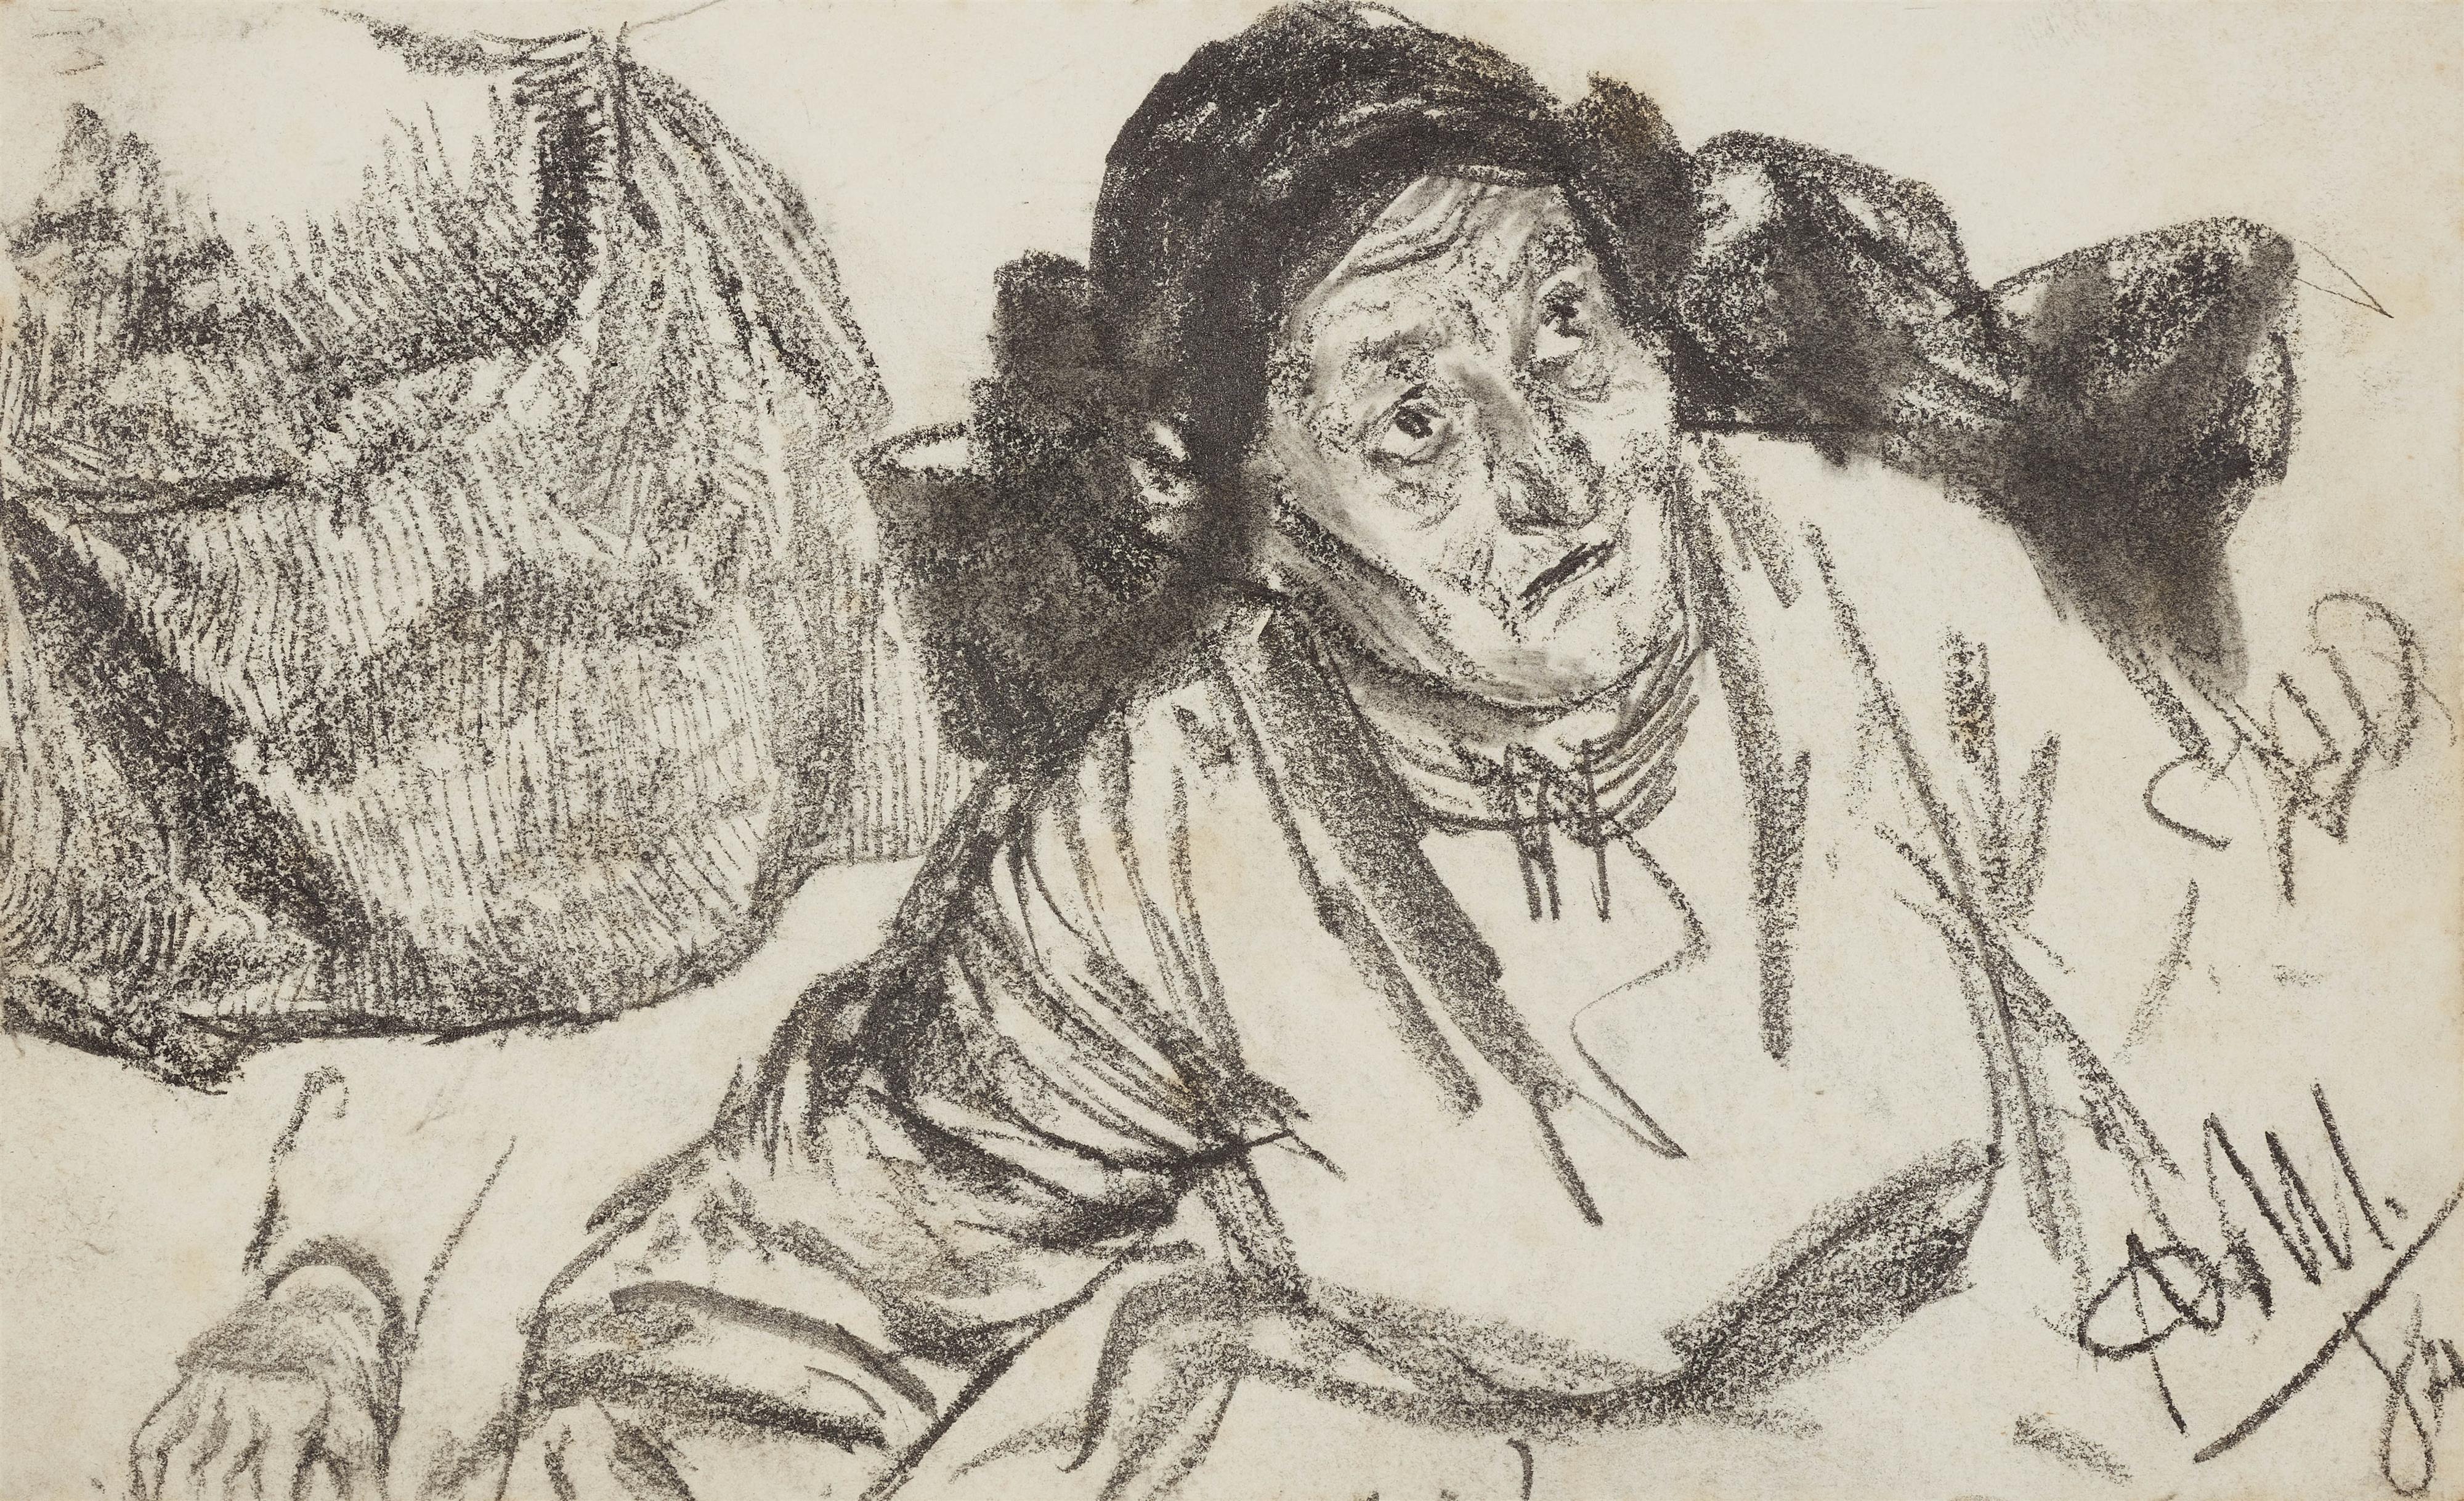 Adolph von Menzel - Study of an Old Woman - image-1